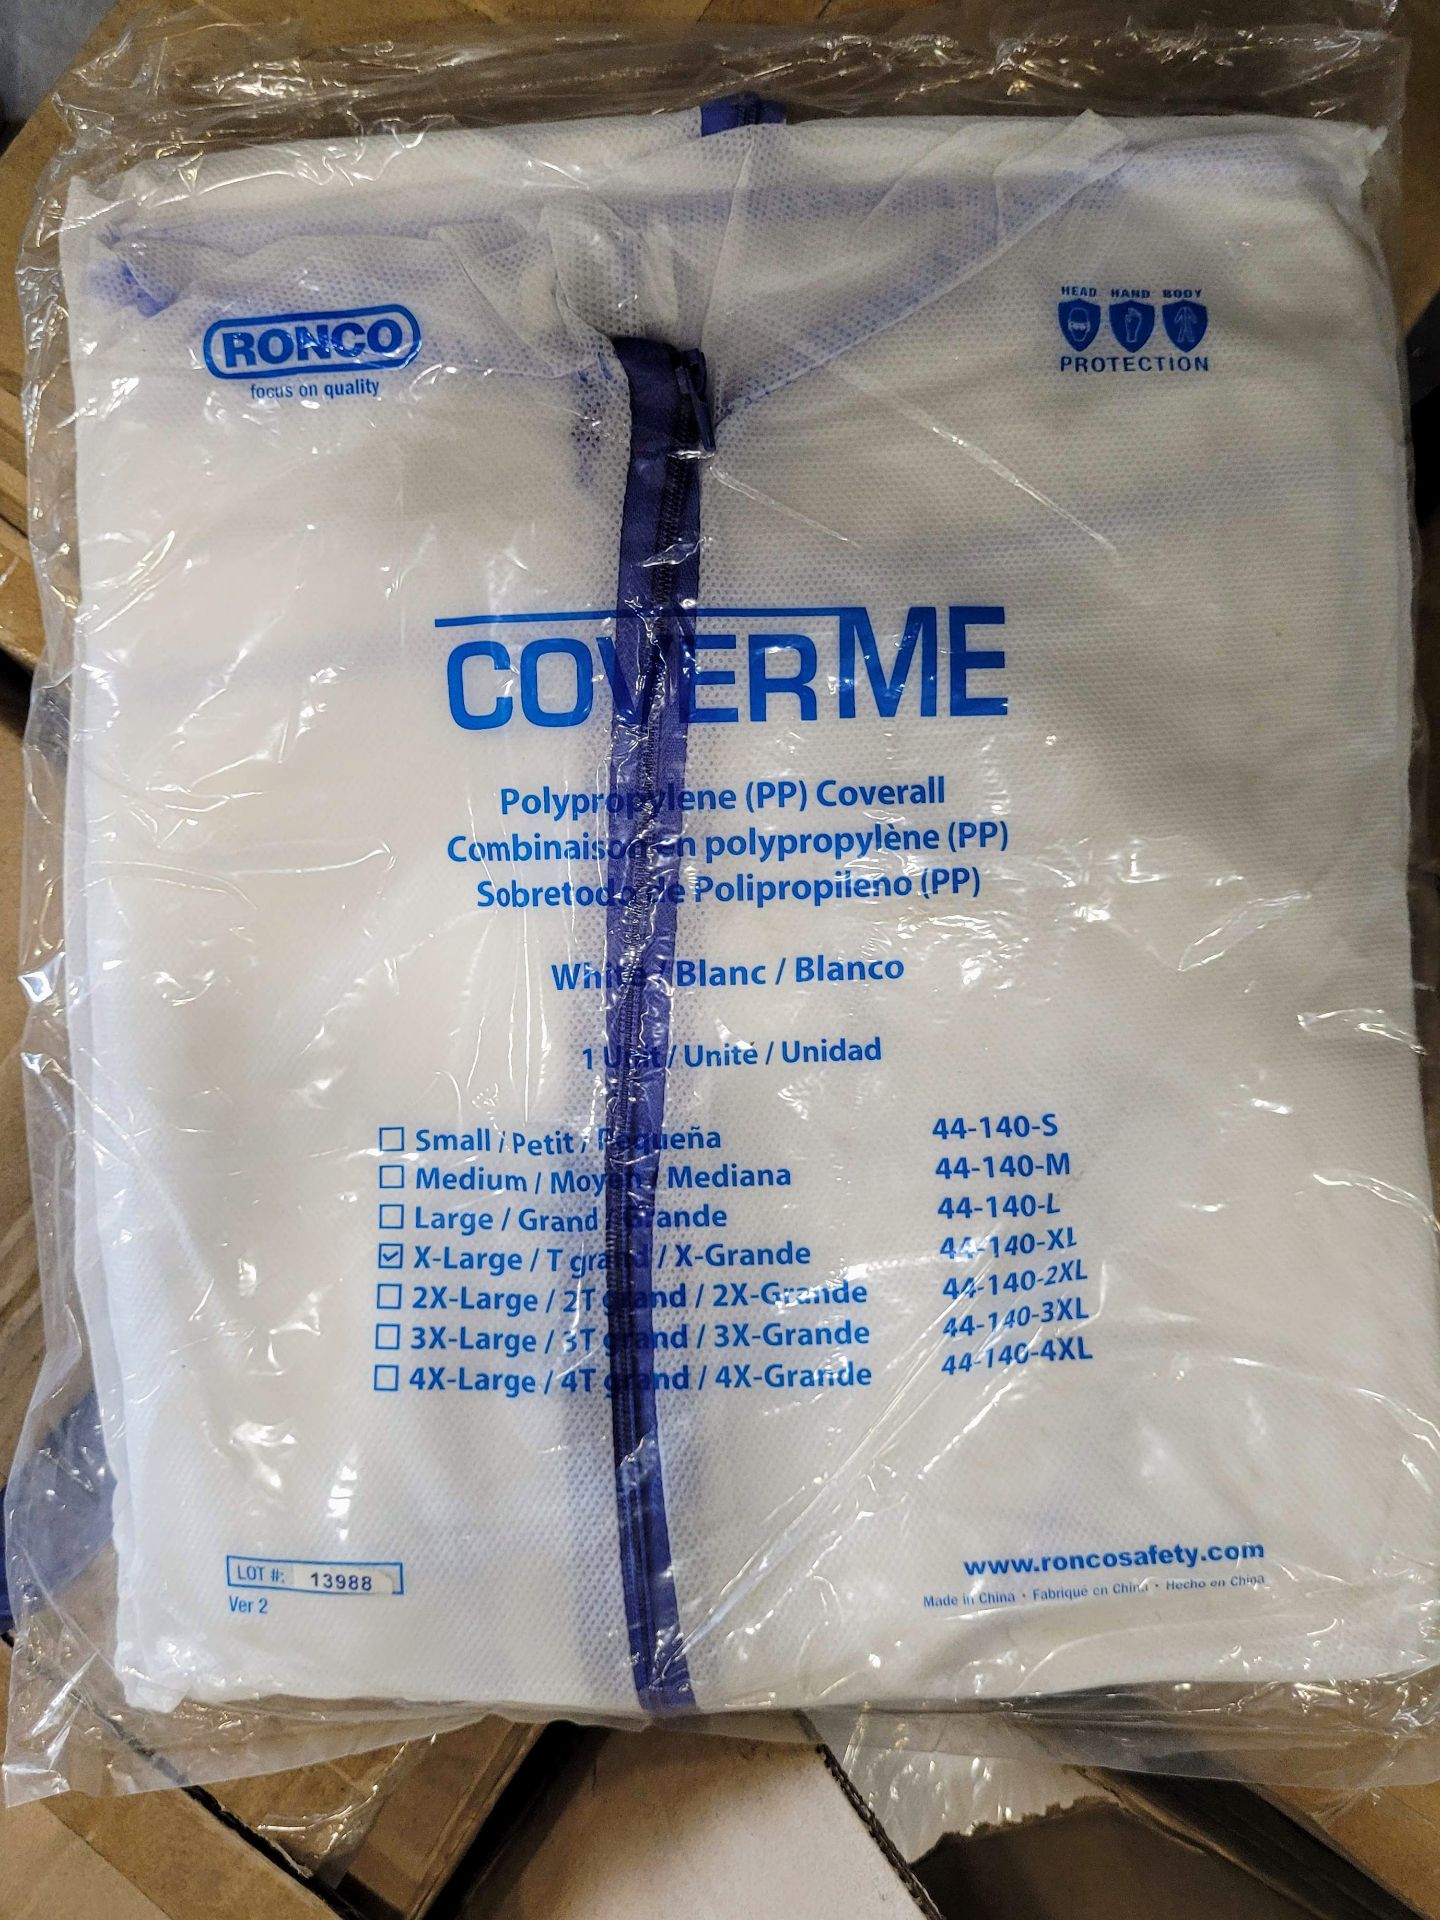 LOT - (4) BOXES OF RONCO 44-140-XL POLYPROPYLENE WHITE COVERALLS - Image 2 of 2